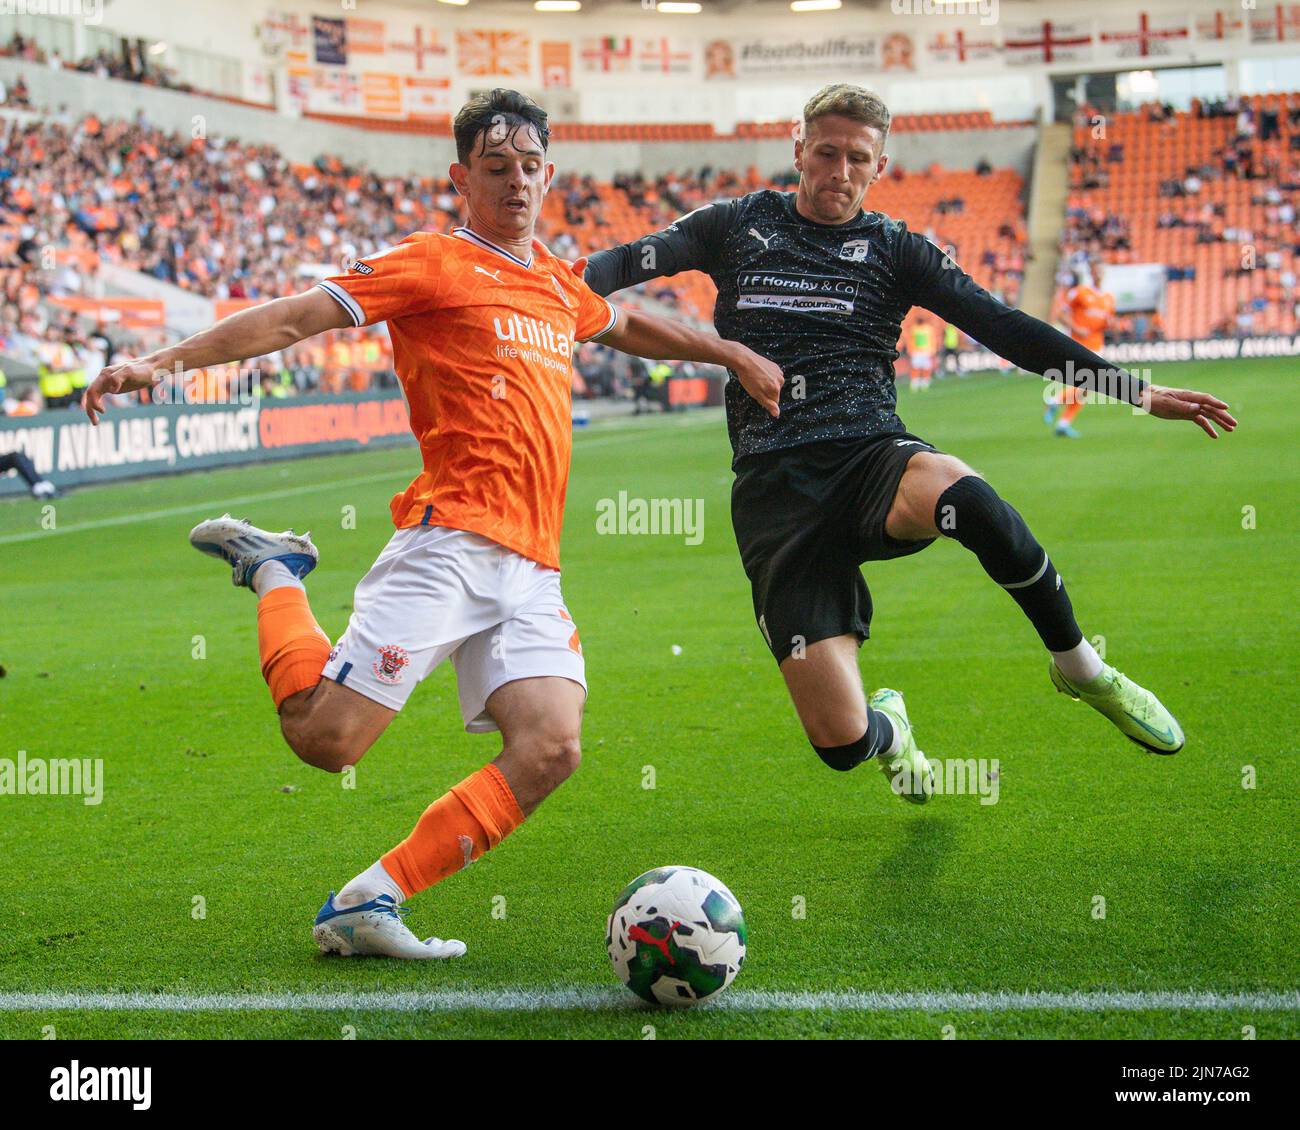 Charlie Patino #28 of Blackpool and Patrick Brough #3 of Barrow battle for the ball in, on 8/9/2022. (Photo by Craig Thomas/News Images/Sipa USA) Credit: Sipa USA/Alamy Live News Stock Photo